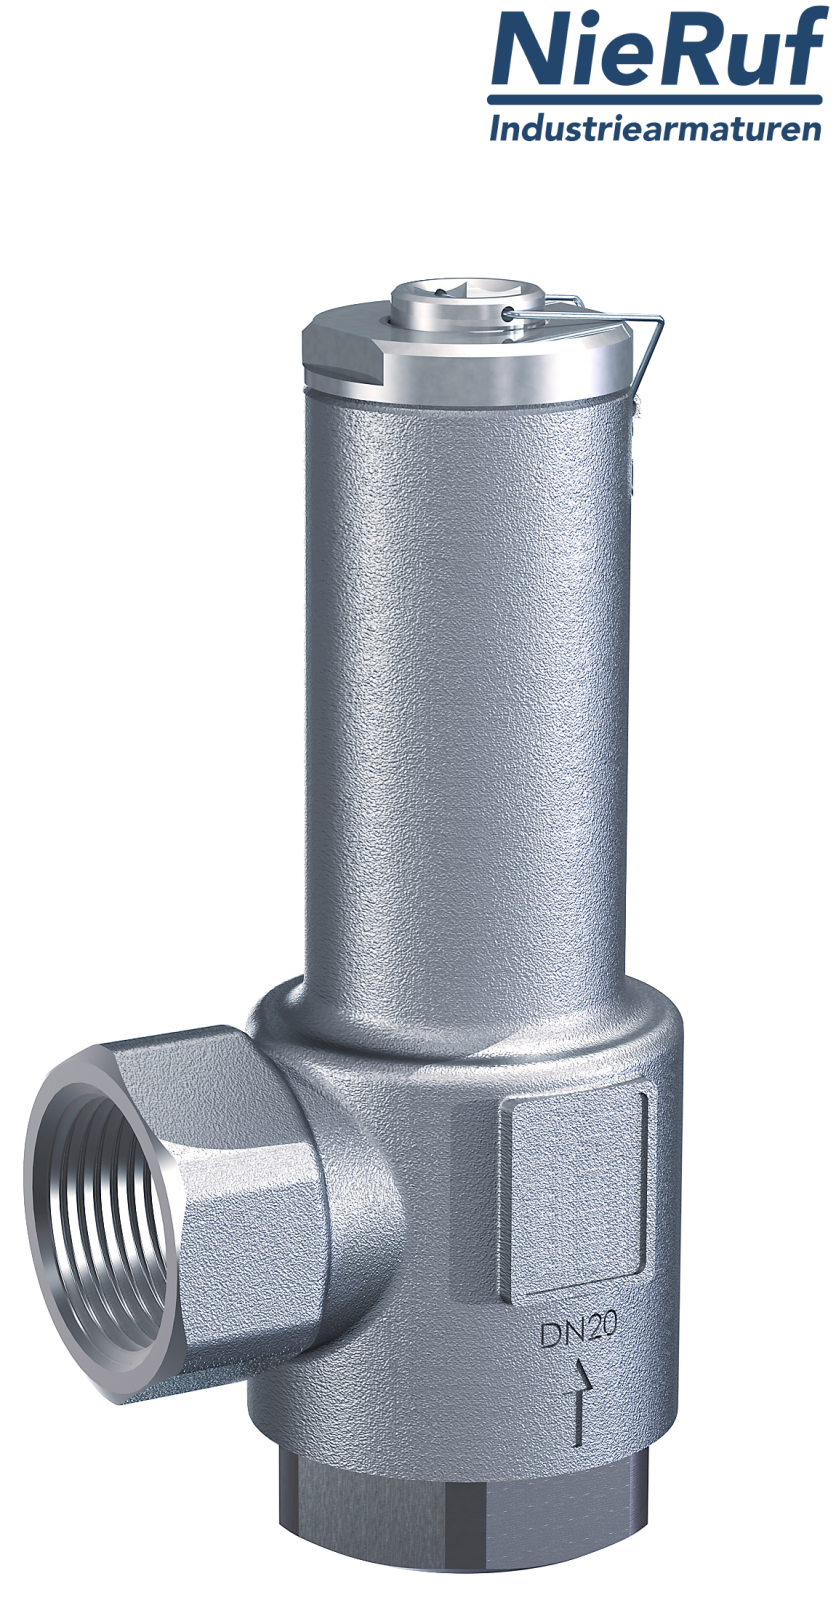 angle-type overflow valve 3/8" inch fm UV04 stainless steel AISI 316L 2 - 12 bar